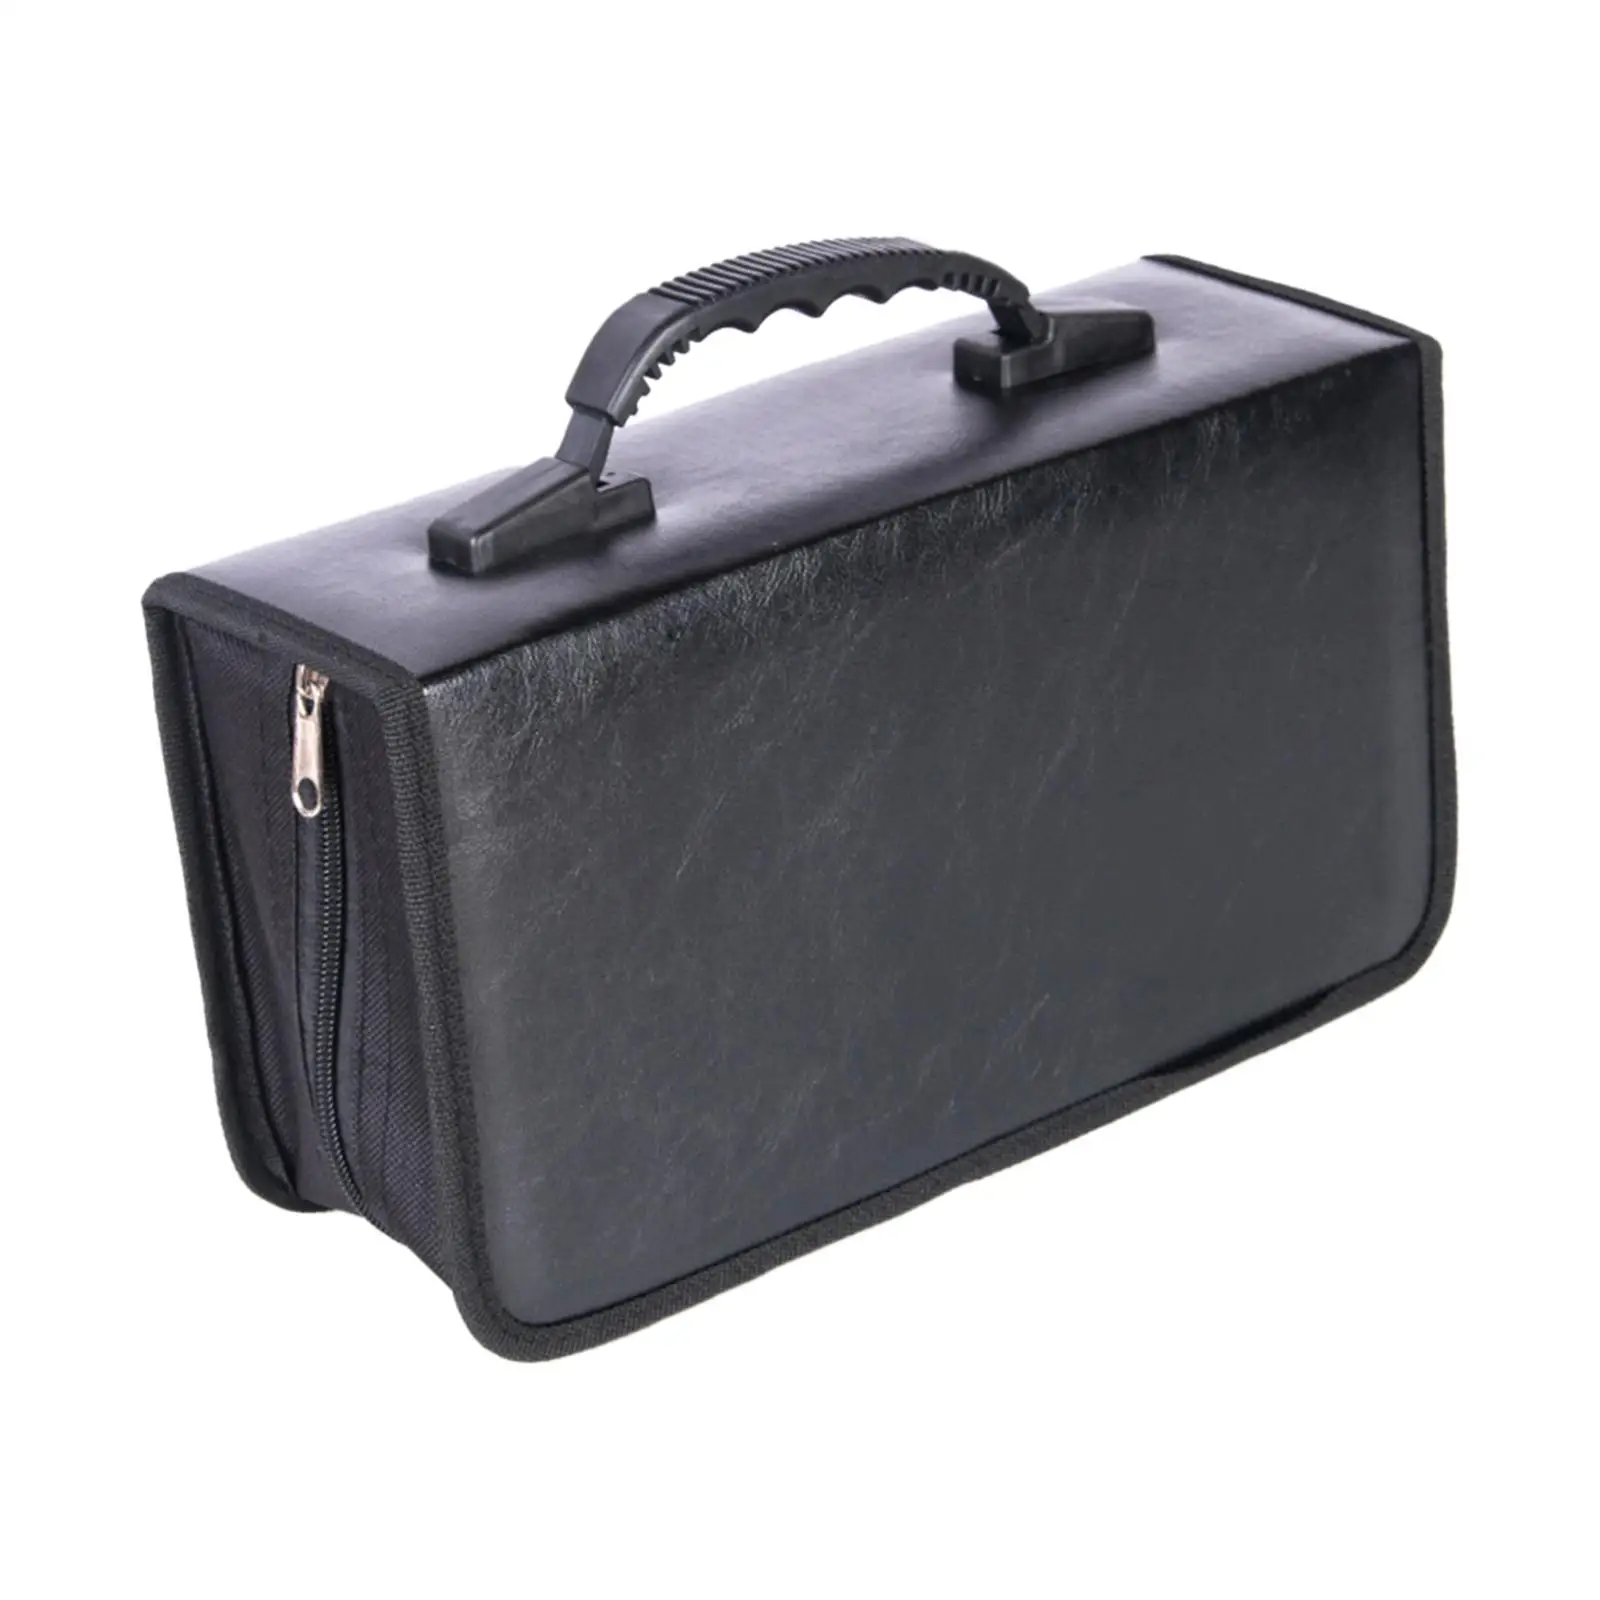 CD Case Carrying Protective Portable DVD Vcd Storage Box Organizer Bag DVD Package for Office Games Disc Travel Car